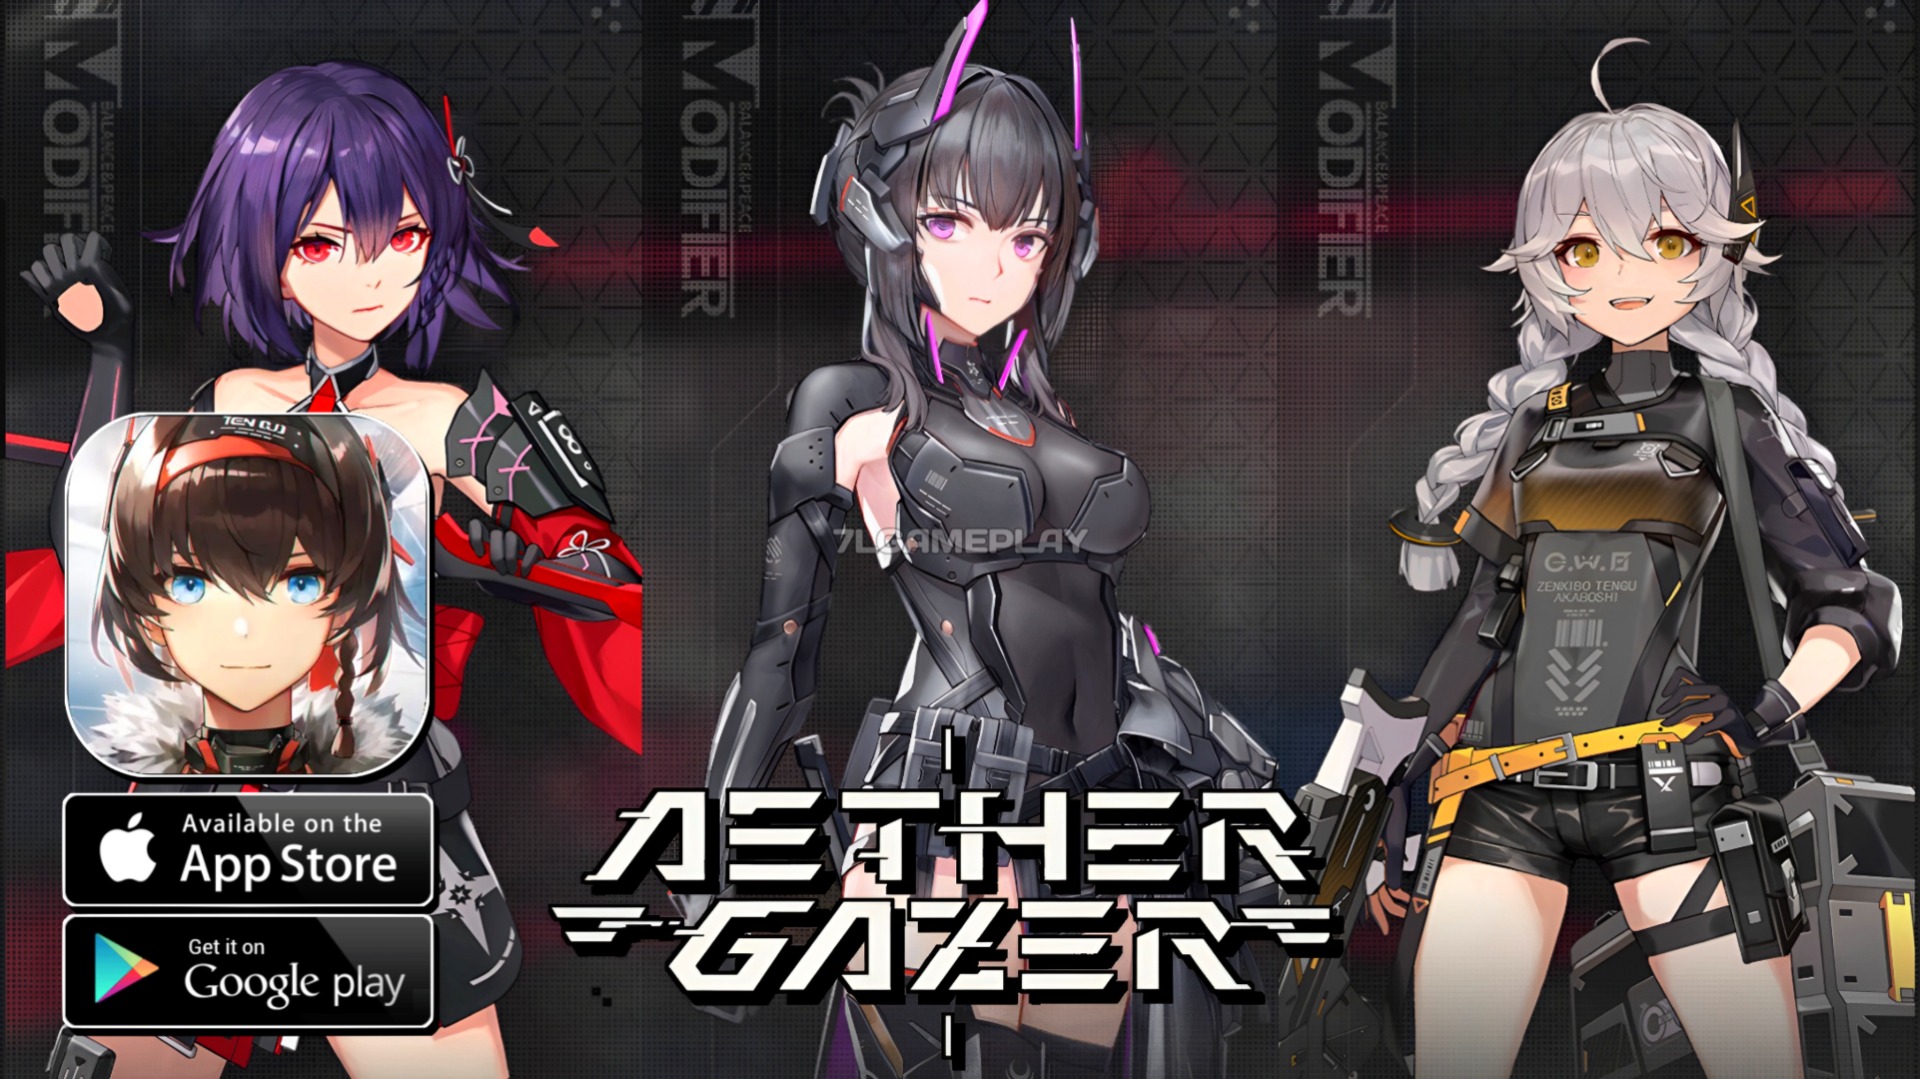 Aether Gazer - Closed Beta signup for anime mobile action RPG